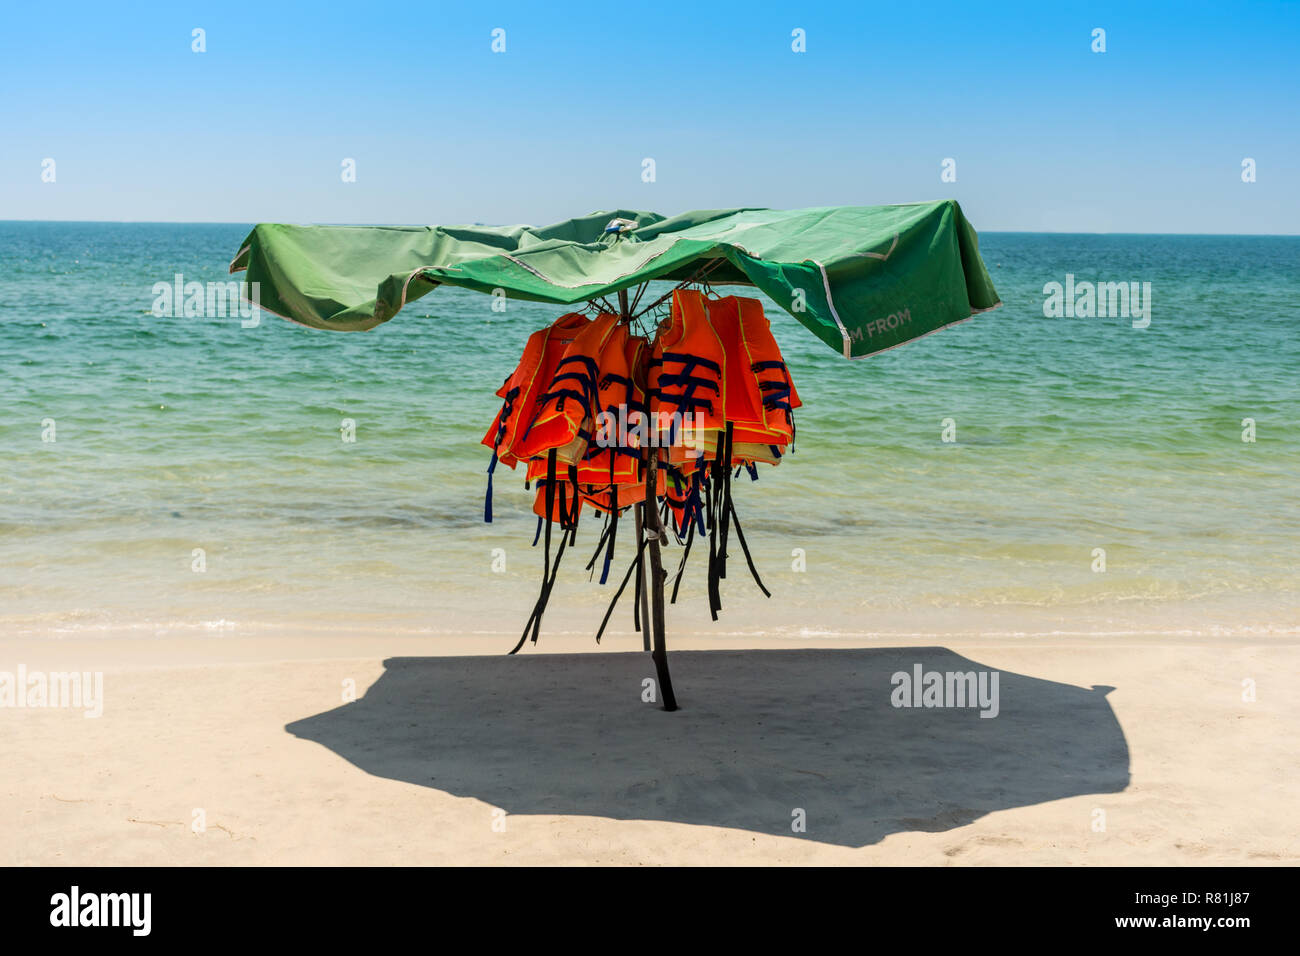 Personal floatation devices shaded from the sun under an umbrella on an empty beach. Stock Photo